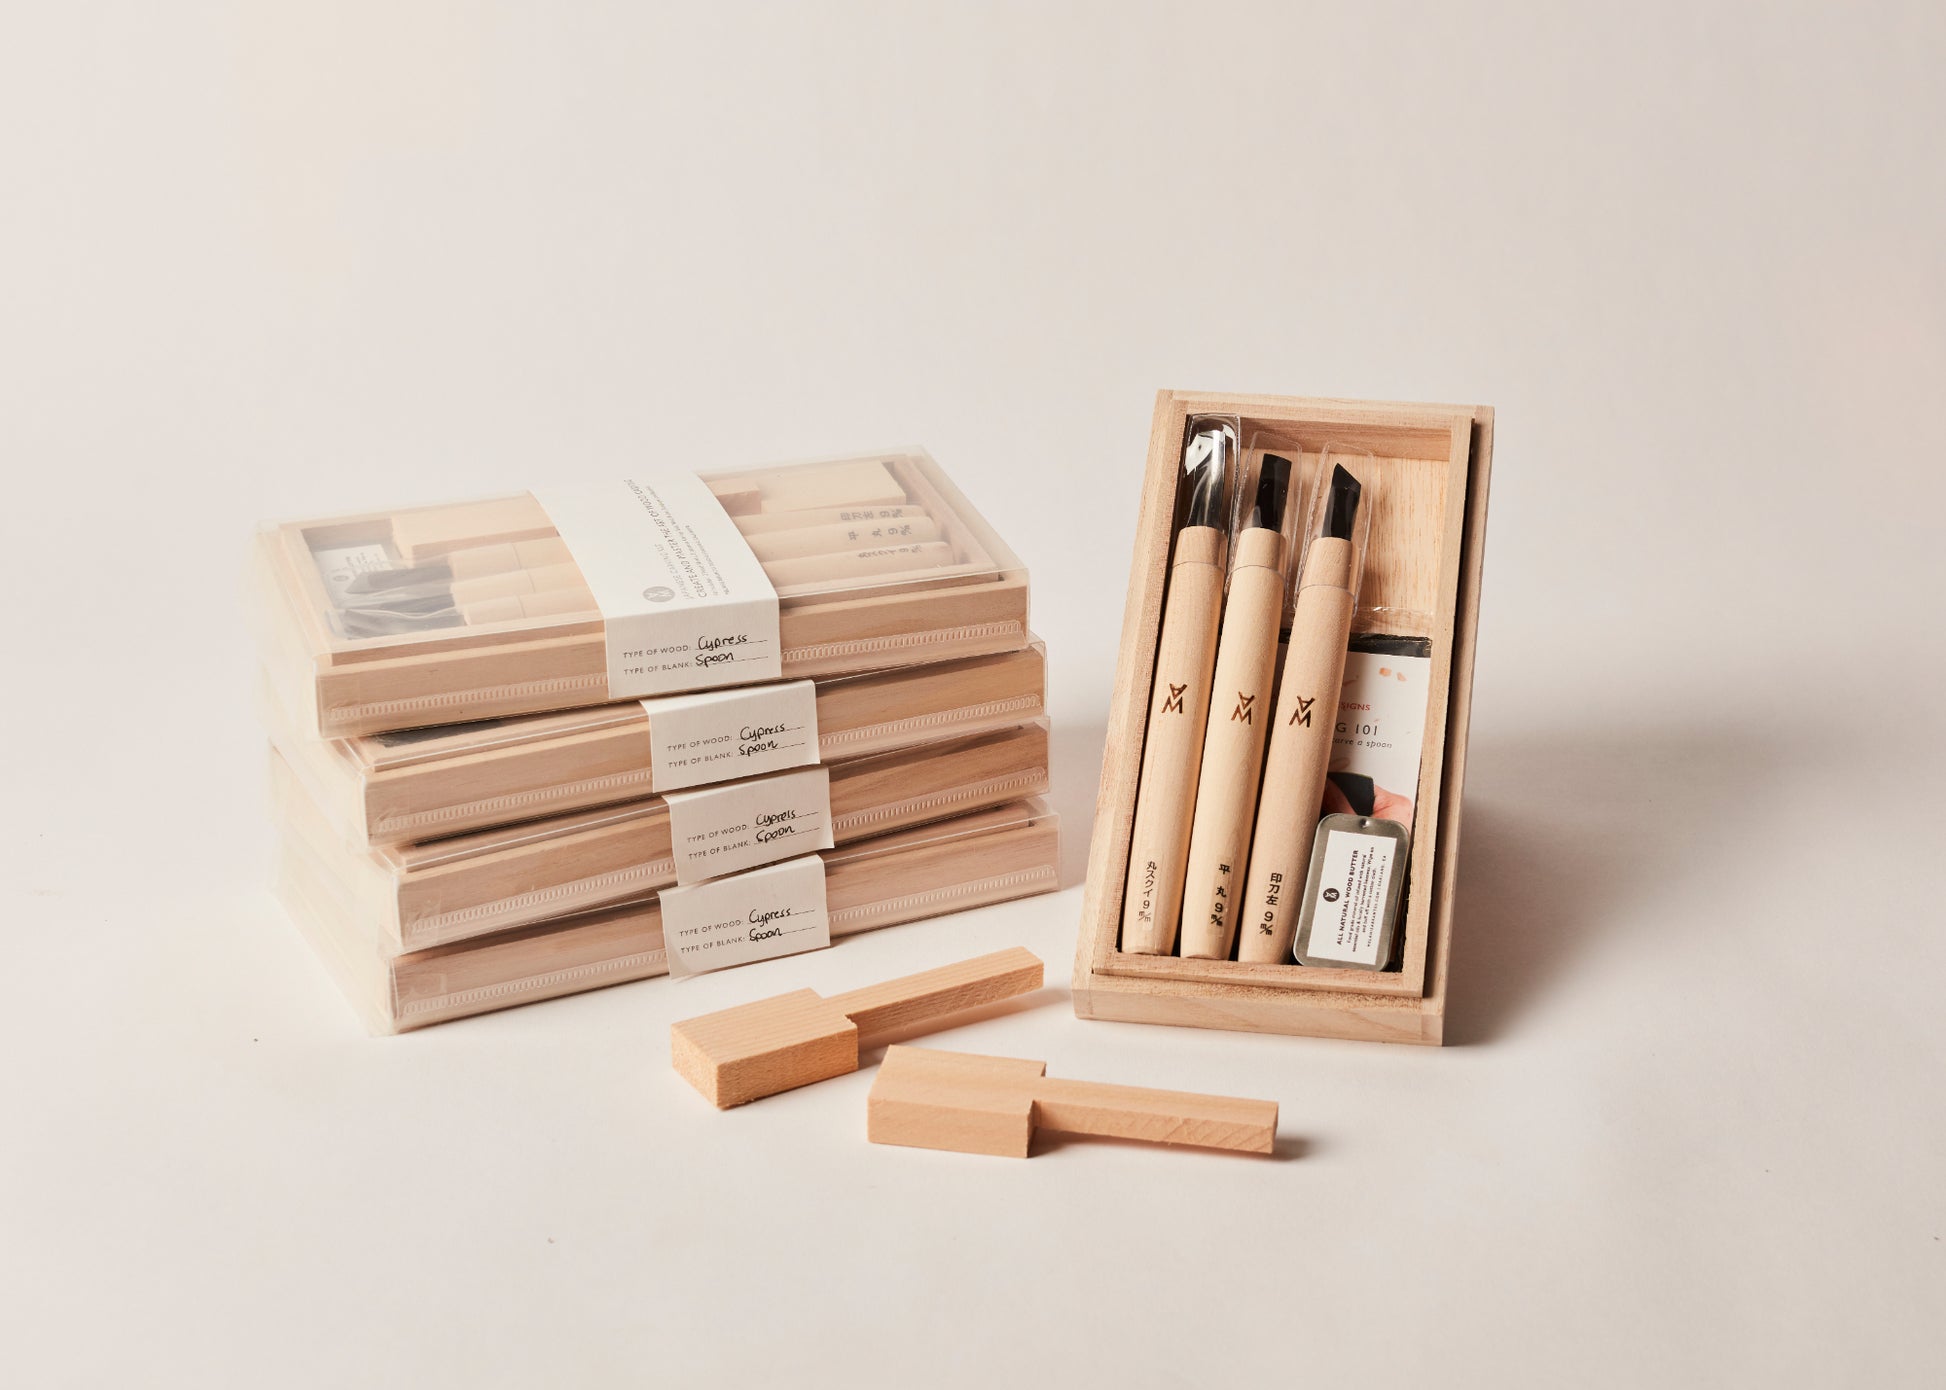 Beginner Spoon Carving Kit. Four kits stacked up with one open kit displaying three carving tools, instructions, sandpaper, bandaid, wood butter, and two spoon blanks. By Melanie Abrantes Designs.